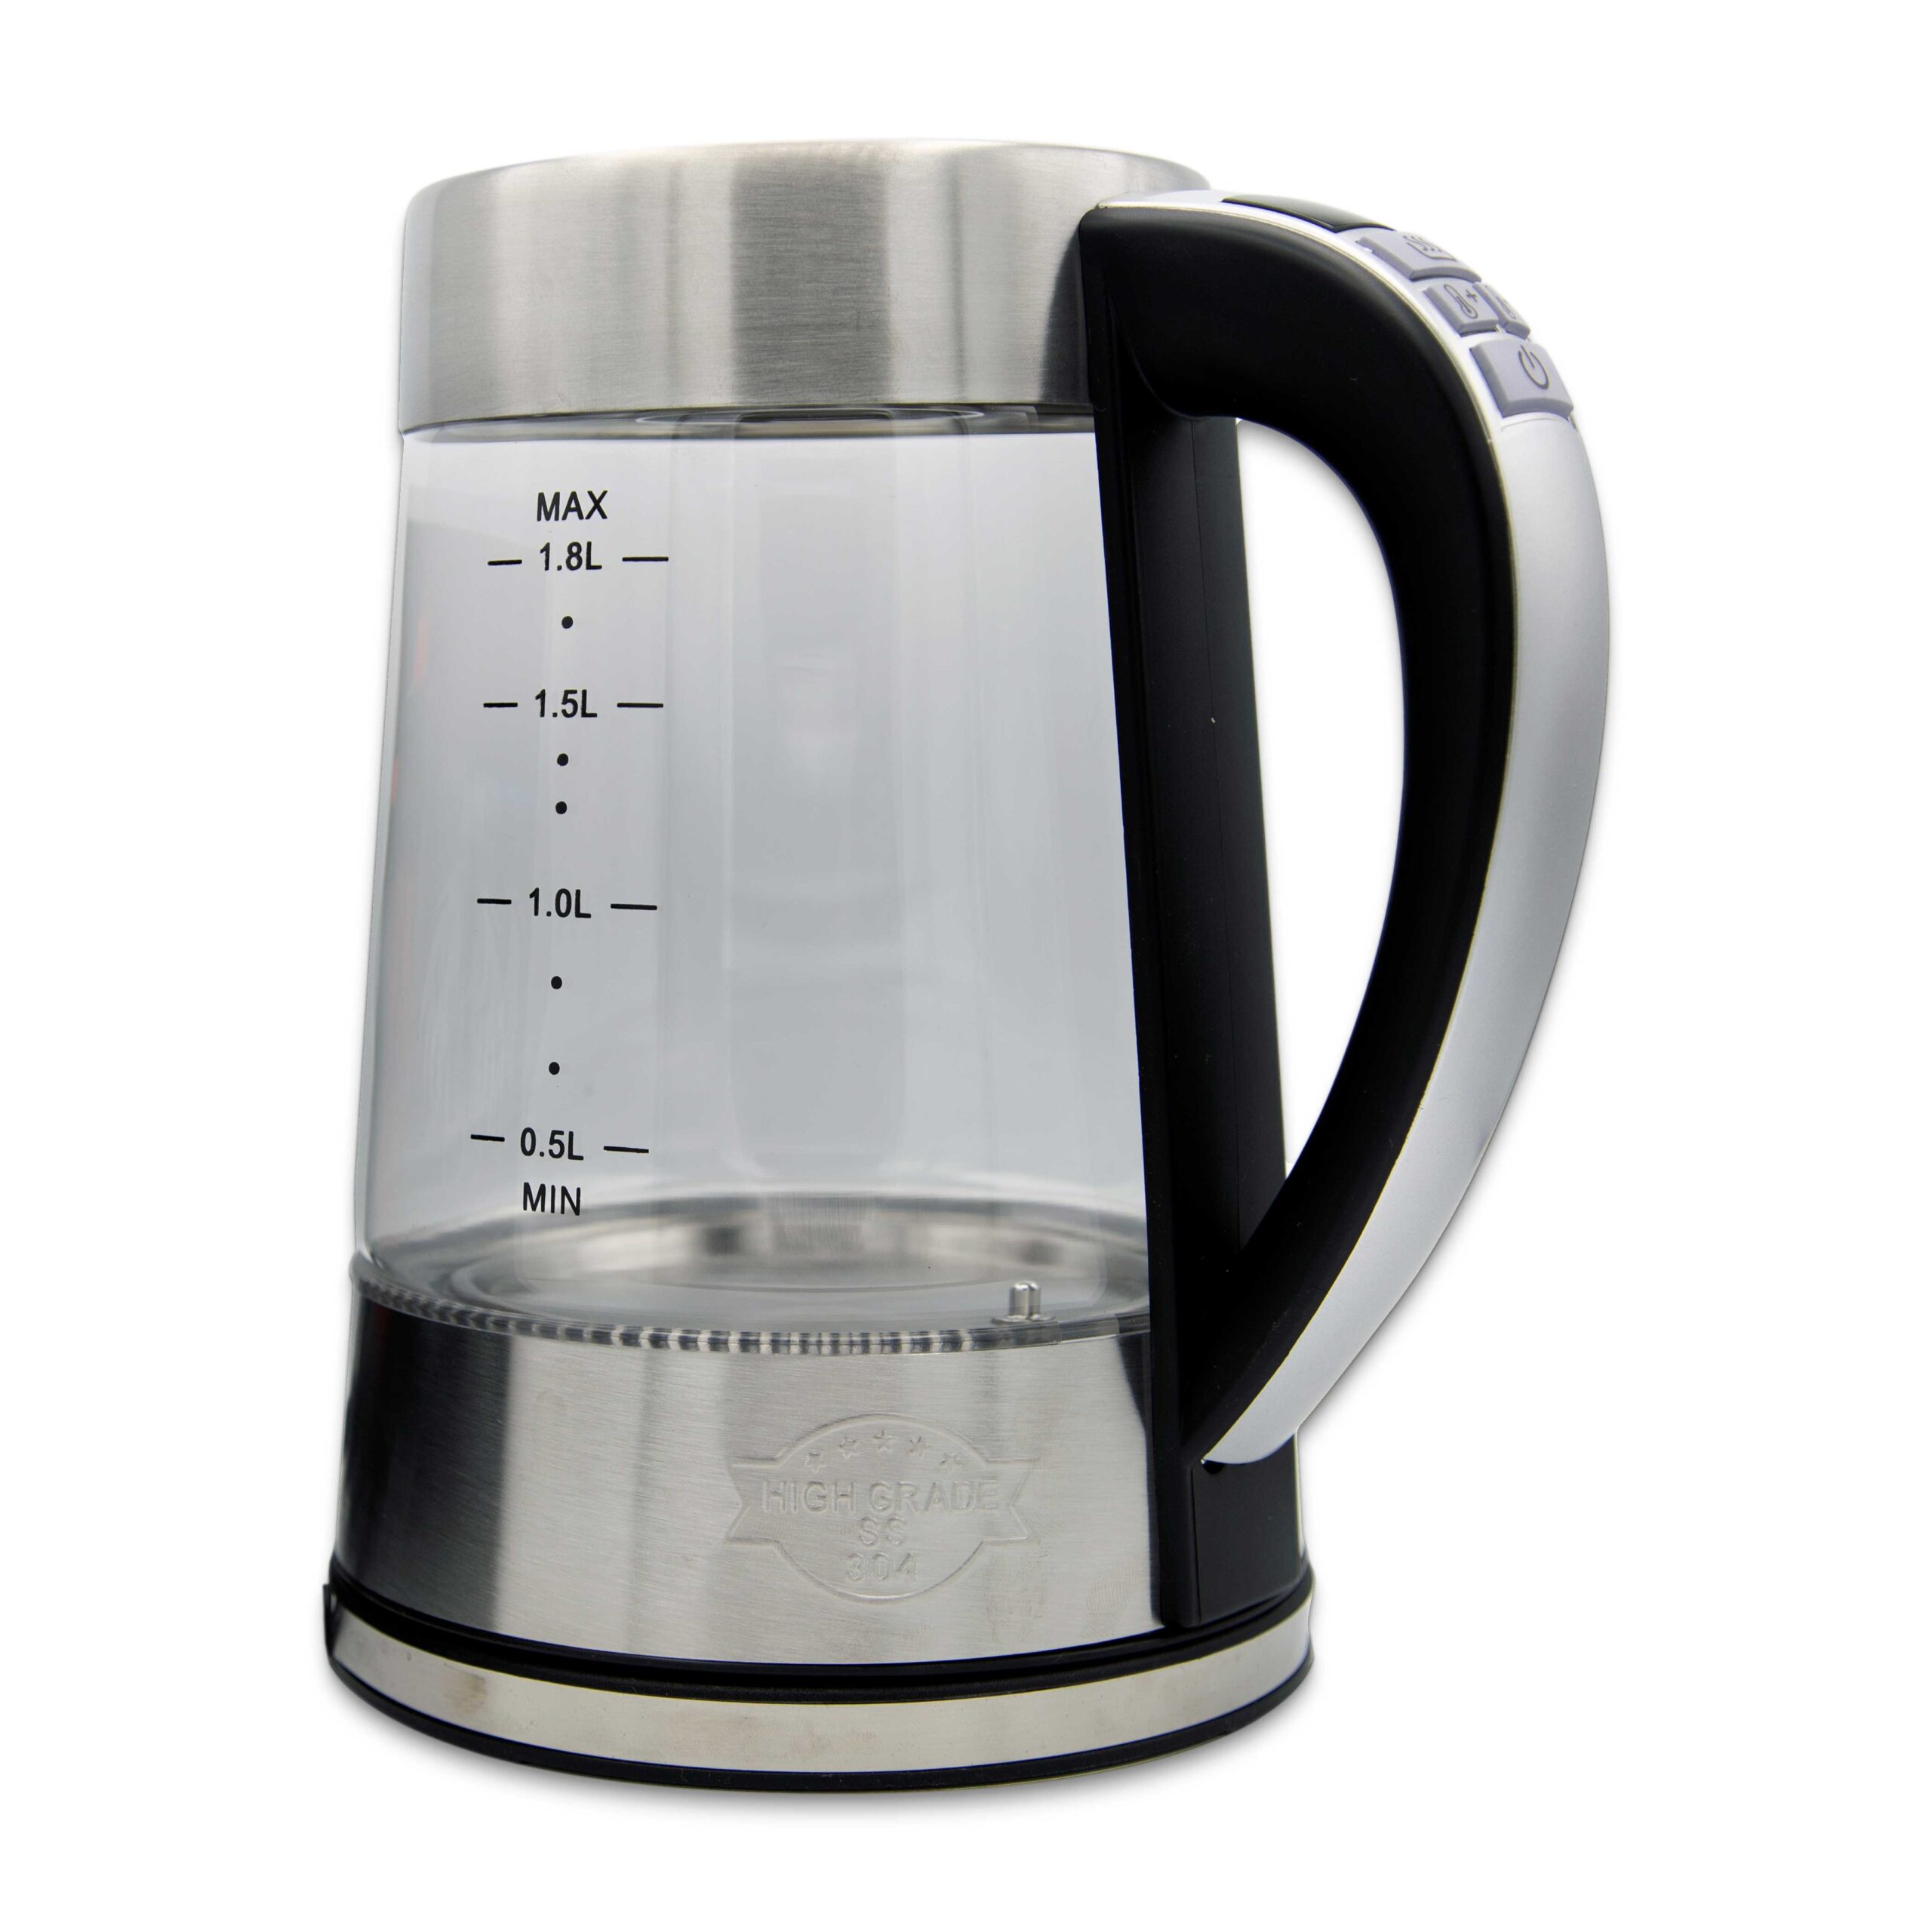 https://wickedtea.life/wp-content/uploads/2020/05/60-KETTLE-CLEAR-1Edited-scaled.jpg